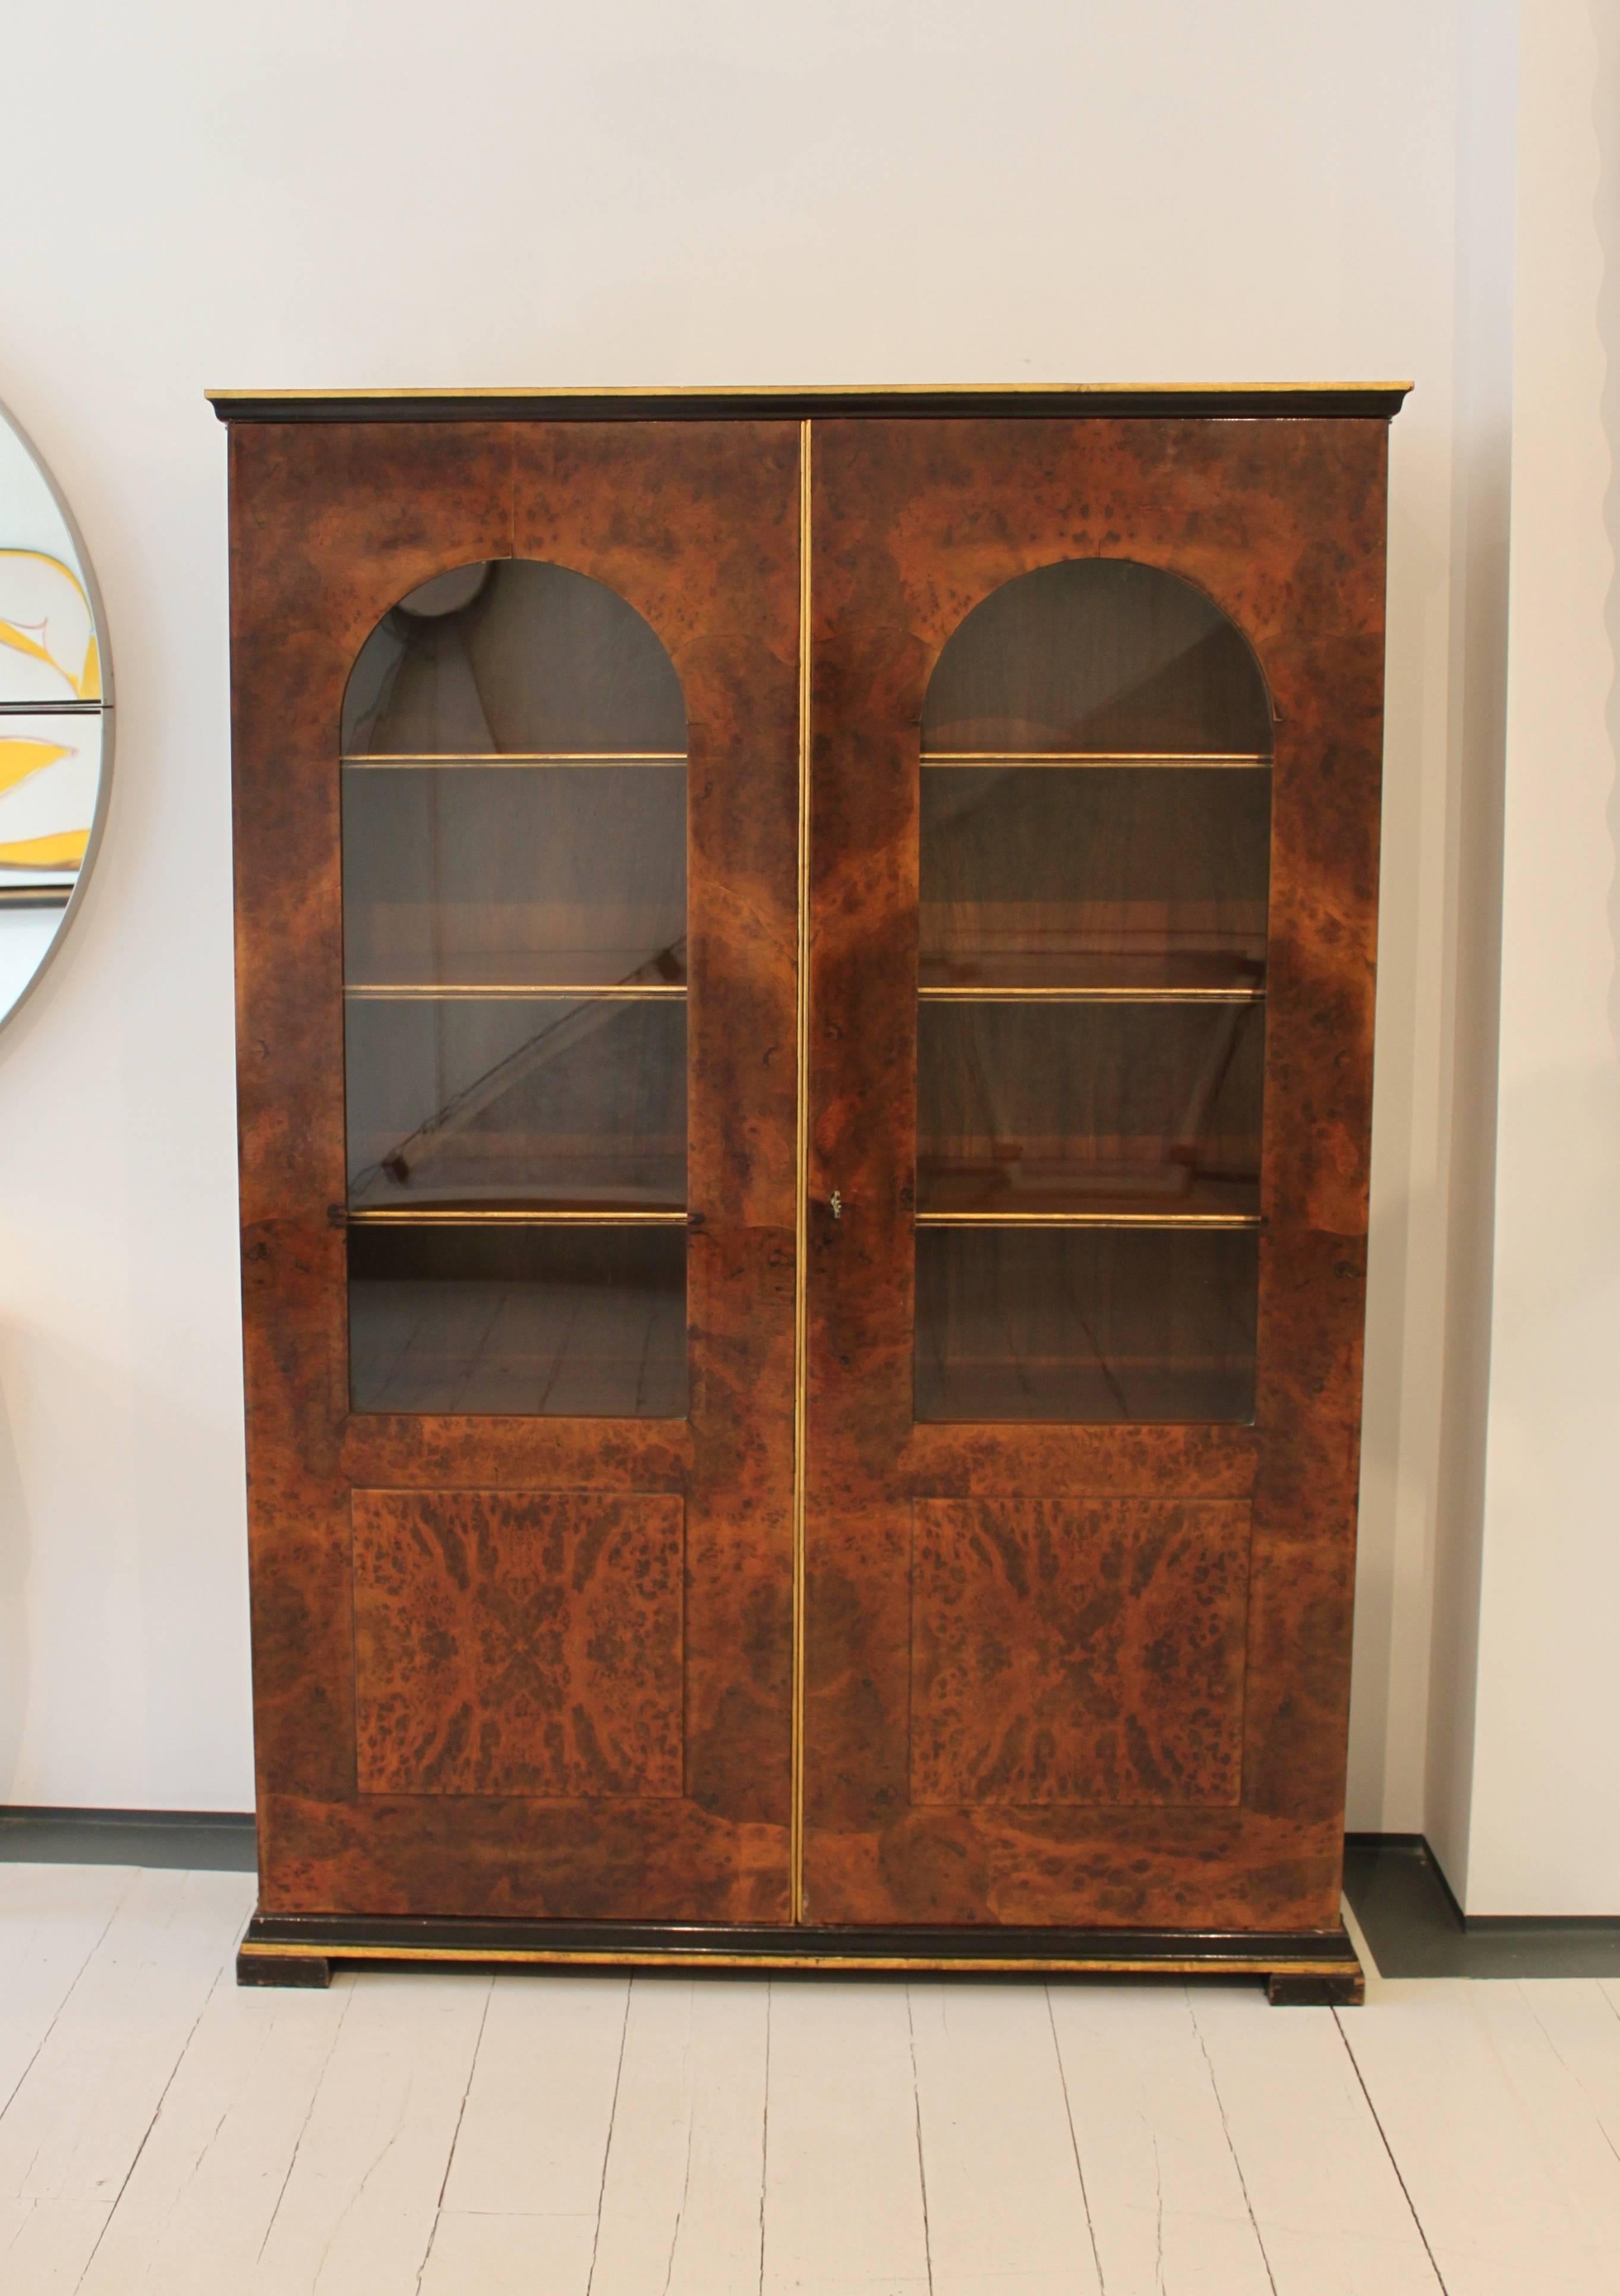 Pair of glazed bookcases in Italian root walnut with gilt details.
From a suite designed as a rare collaboration of Buzzi and Gio Ponti.